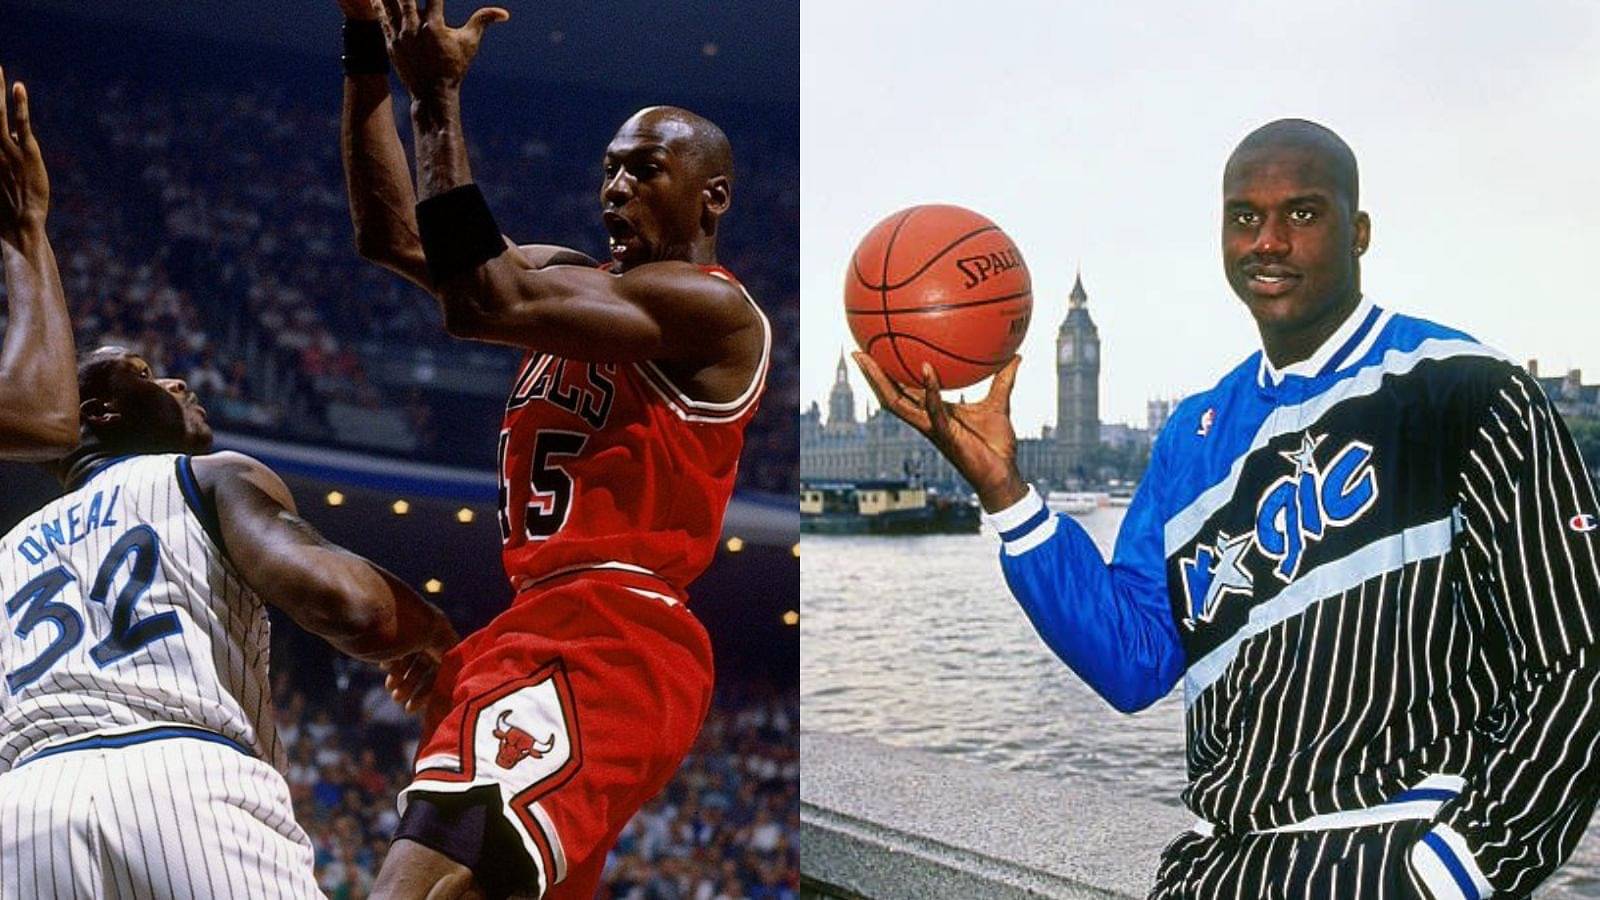 How a slim 7 foot Shaquille O’Neal stopped Michael Jordan’s possible ‘4-peat’